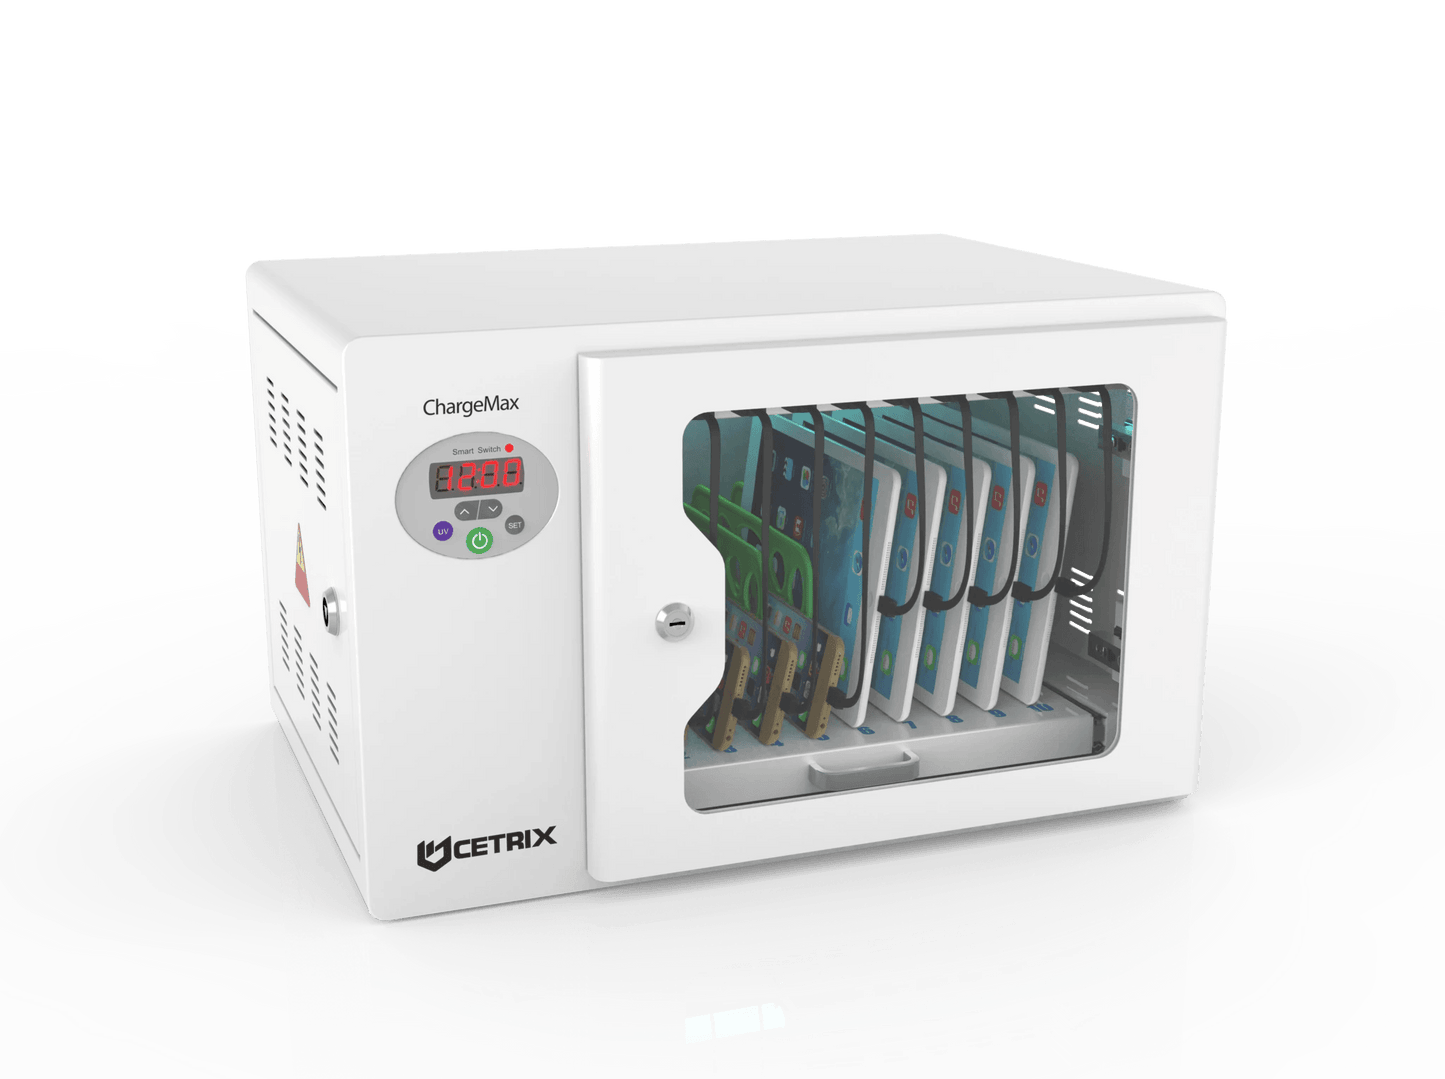 ChargeMax Disinfection Charging Cabinet - 10 bays, 1 Level (CT-10BU). UV light disinfection - UVC lights efficiently kill any bacteria or germs